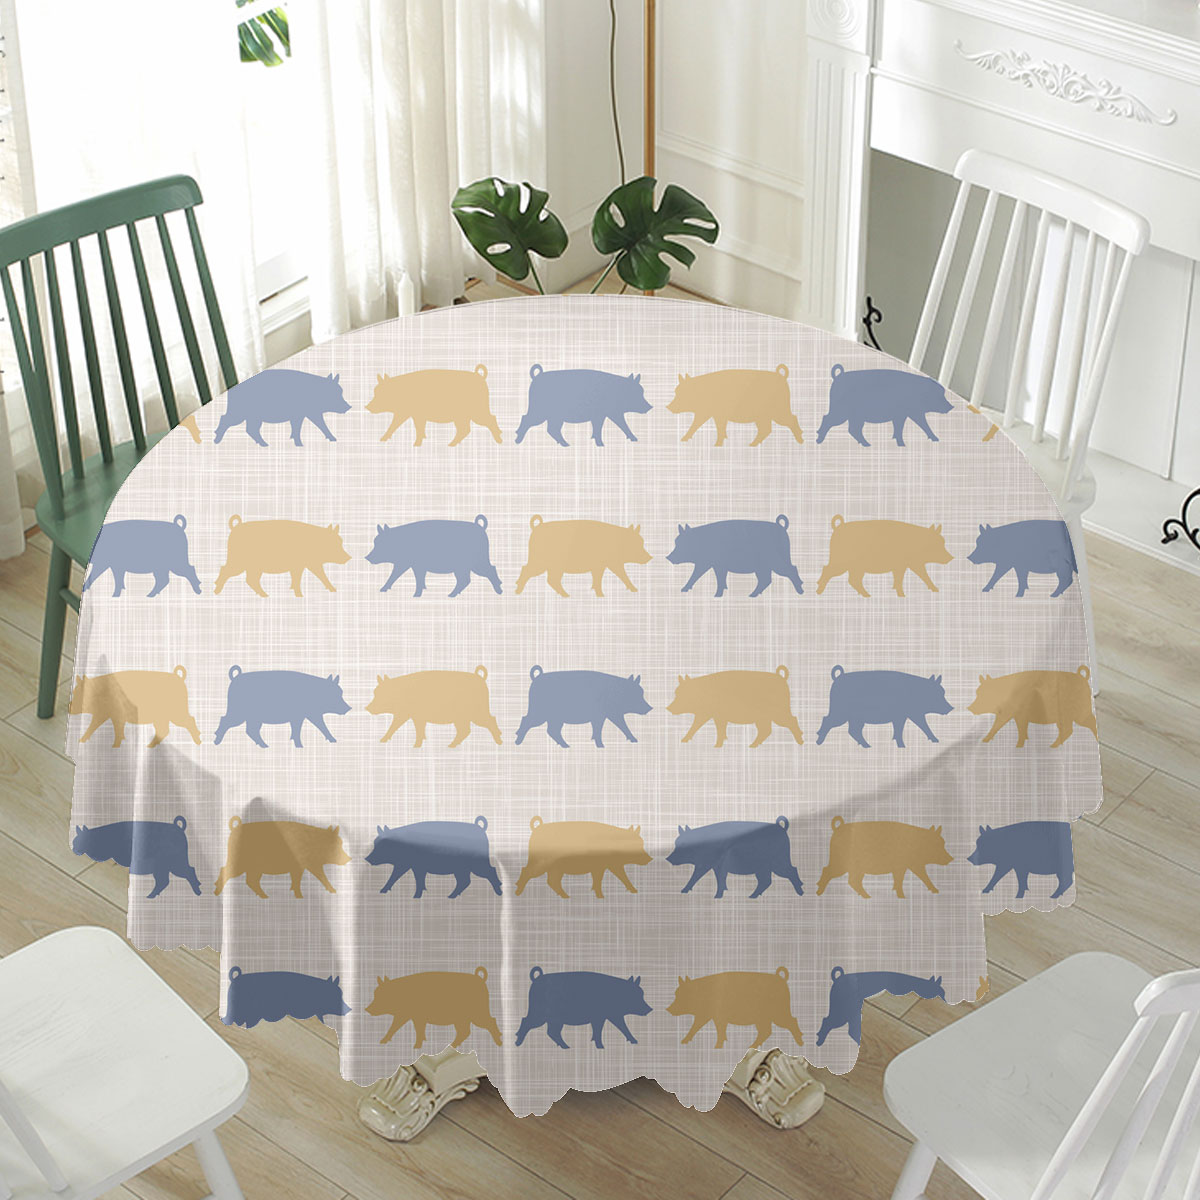 Pig Silhouette Pattern Waterproof Tablecloth